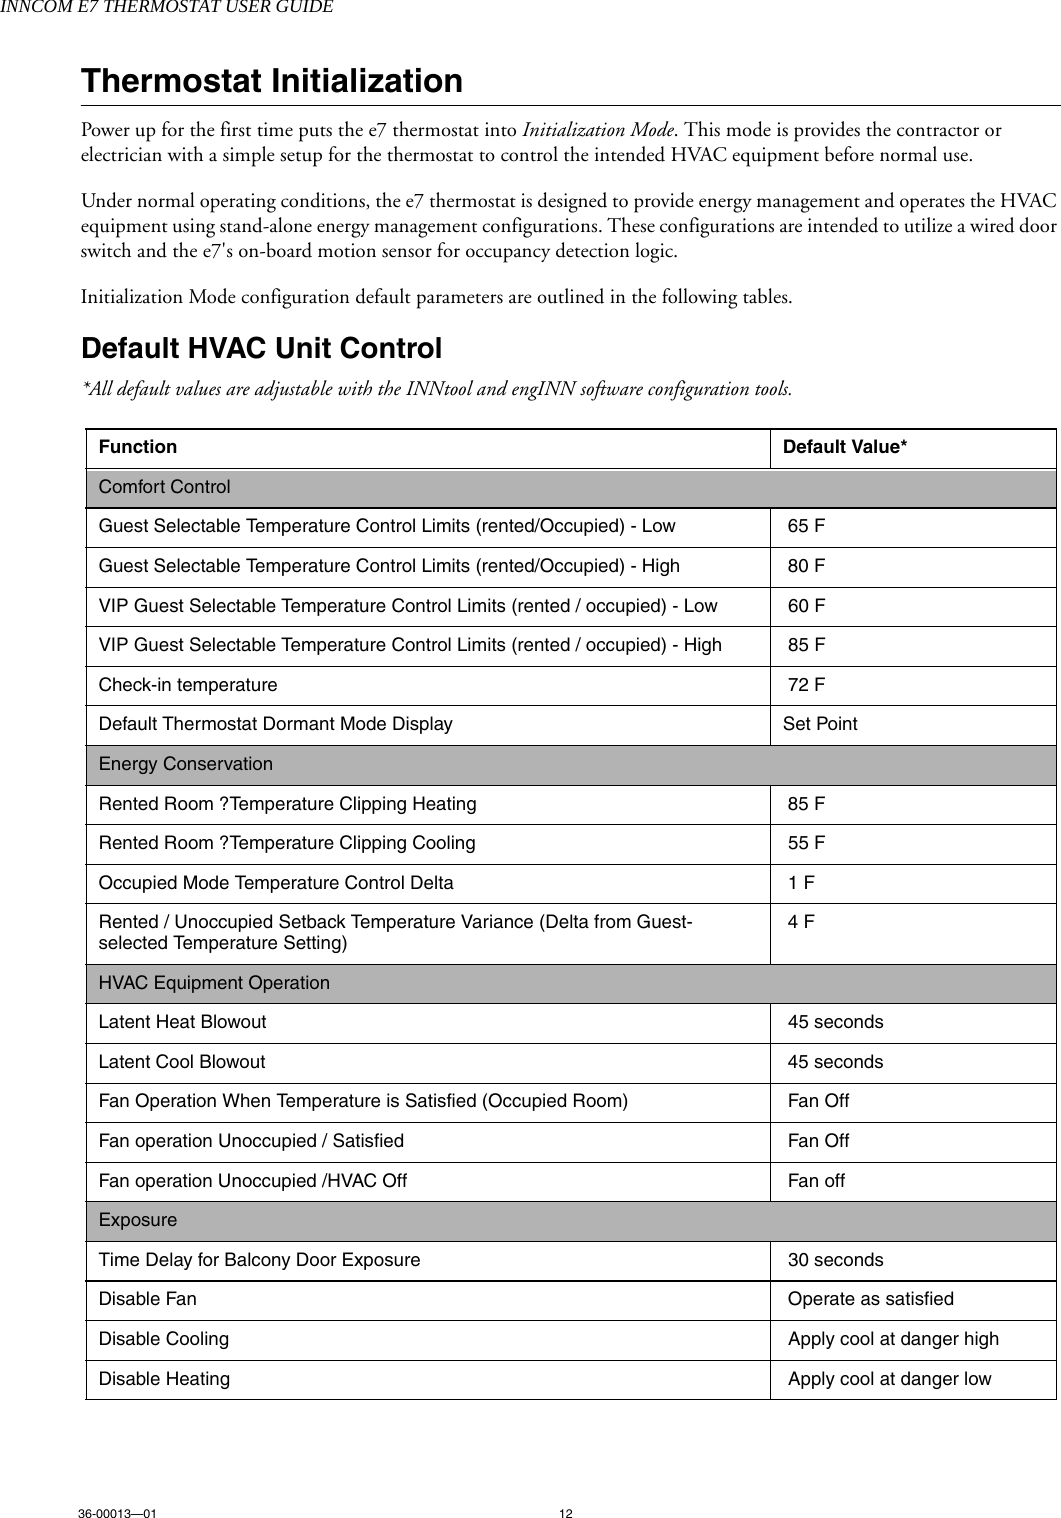 INNCOM E7 THERMOSTAT USER GUIDE36-00013—01 12Thermostat InitializationPower up for the first time puts the e7 thermostat into Initialization Mode. This mode is provides the contractor or electrician with a simple setup for the thermostat to control the intended HVAC equipment before normal use. Under normal operating conditions, the e7 thermostat is designed to provide energy management and operates the HVAC equipment using stand-alone energy management configurations. These configurations are intended to utilize a wired door switch and the e7&apos;s on-board motion sensor for occupancy detection logic. Initialization Mode configuration default parameters are outlined in the following tables. Default HVAC Unit Control   *All default values are adjustable with the INNtool and engINN software configuration tools.     Function Default Value*Comfort ControlGuest Selectable Temperature Control Limits (rented/Occupied) - Low   65 FGuest Selectable Temperature Control Limits (rented/Occupied) - High  80 FVIP Guest Selectable Temperature Control Limits (rented / occupied) - Low  60 FVIP Guest Selectable Temperature Control Limits (rented / occupied) - High  85 FCheck-in temperature   72 FDefault Thermostat Dormant Mode Display Set PointEnergy ConservationRented Room ?Temperature Clipping Heating  85 FRented Room ?Temperature Clipping Cooling  55 FOccupied Mode Temperature Control Delta  1 FRented / Unoccupied Setback Temperature Variance (Delta from Guest-selected Temperature Setting) 4 FHVAC Equipment OperationLatent Heat Blowout  45 secondsLatent Cool Blowout  45 secondsFan Operation When Temperature is Satisfied (Occupied Room)  Fan OffFan operation Unoccupied / Satisfied  Fan OffFan operation Unoccupied /HVAC Off  Fan offExposureTime Delay for Balcony Door Exposure  30 secondsDisable Fan   Operate as satisfiedDisable Cooling  Apply cool at danger highDisable Heating  Apply cool at danger low